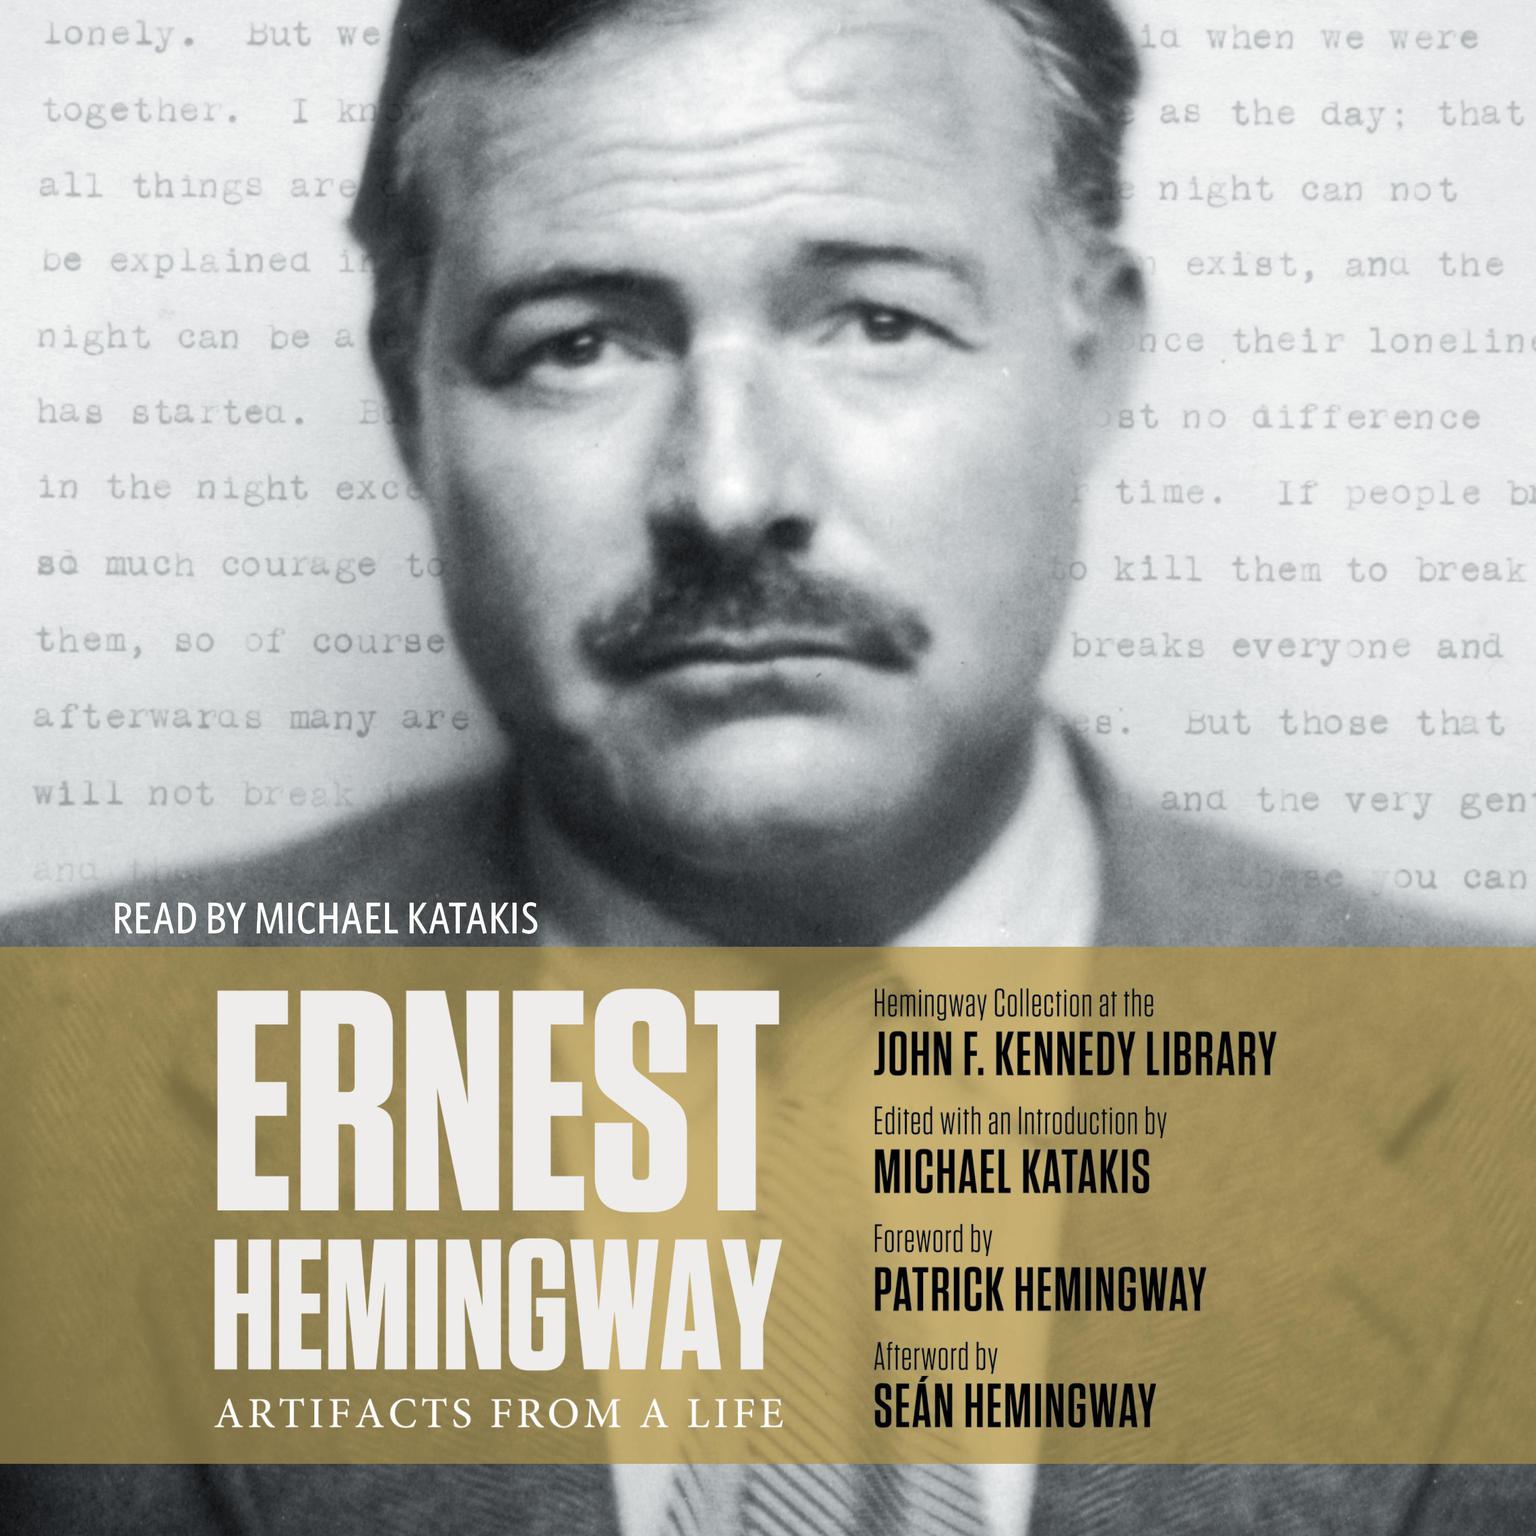 Ernest Hemingway: Artifacts From a Life: Artifacts From a Life Audiobook, by Michael Katakis